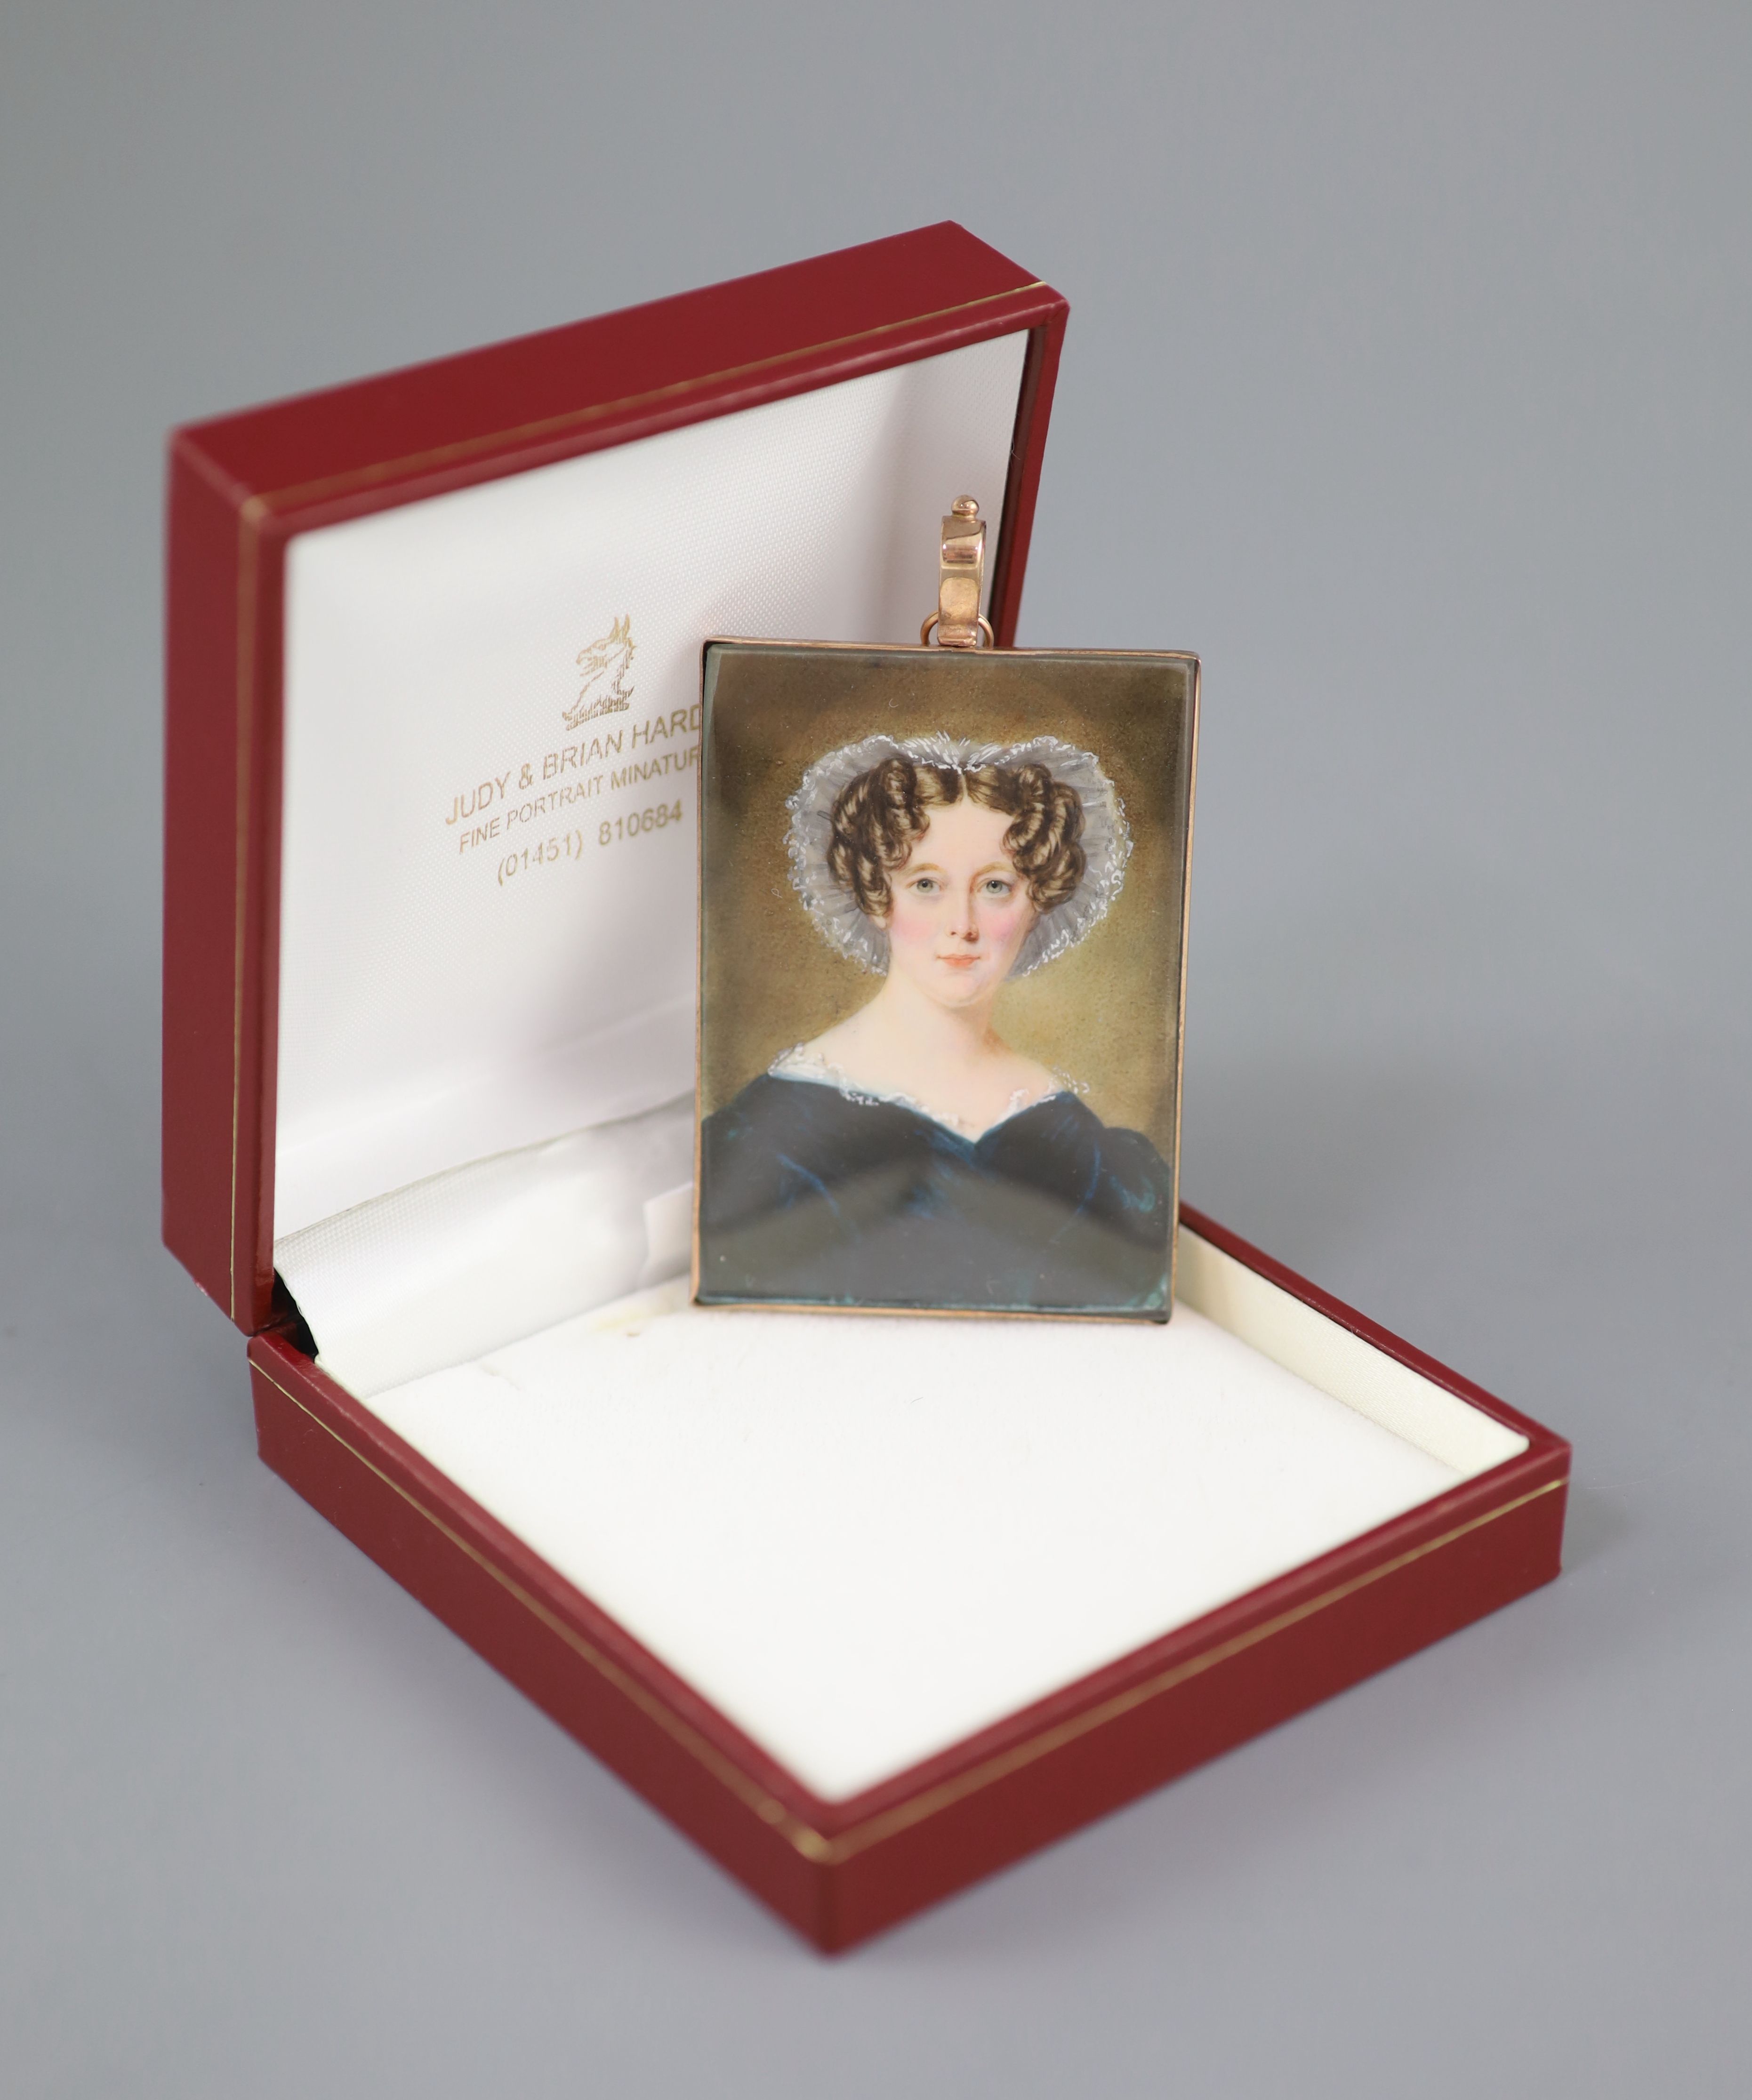 William Egley (1798-1870) Portrait miniature of a lady wearing a lace bonnet and green dress 2.5 x 1.75in., gold framed